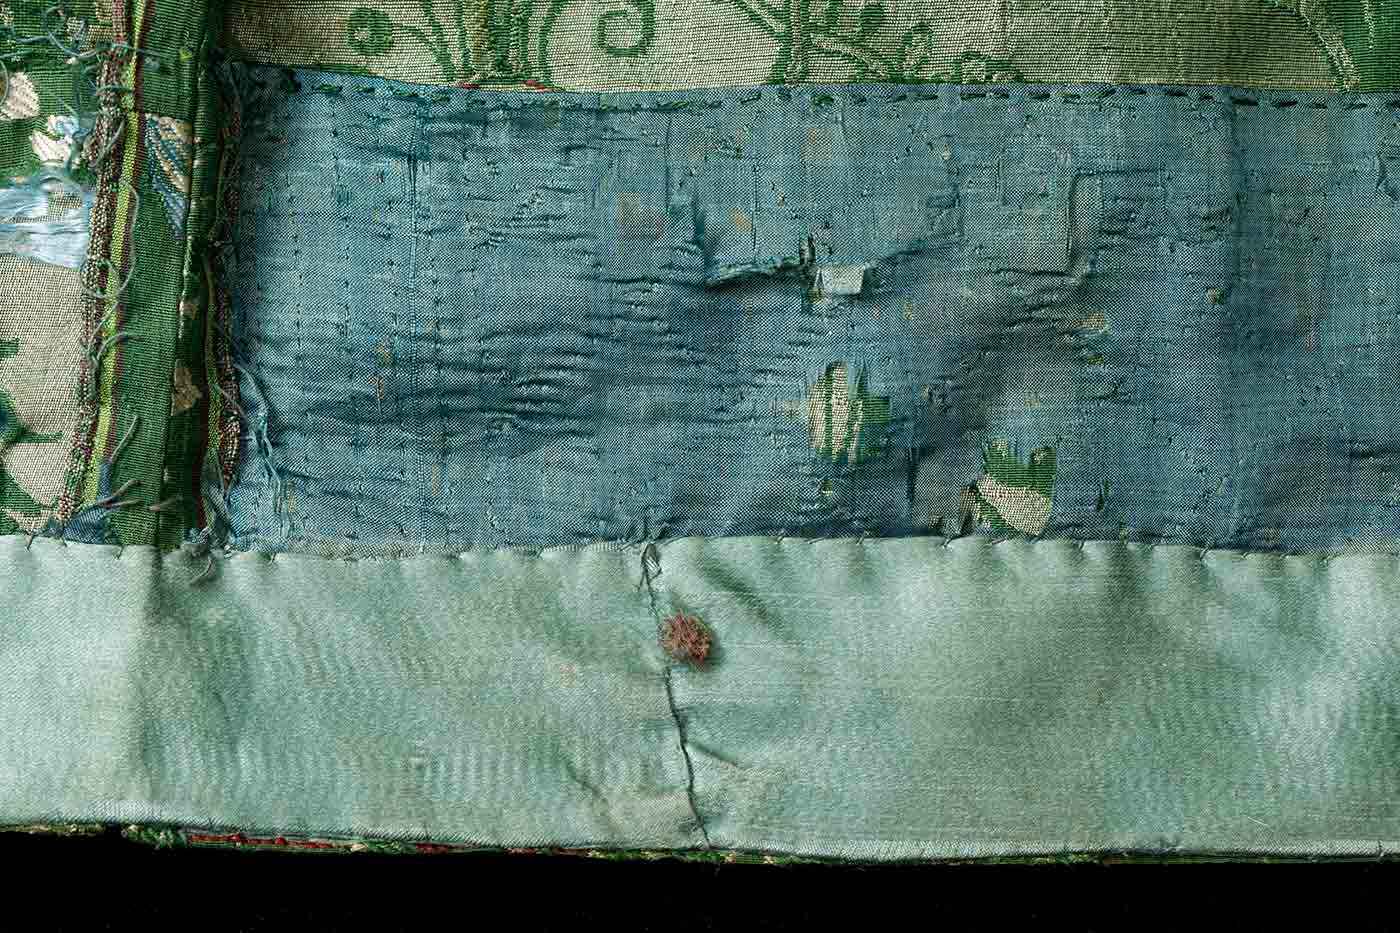 A detail image of the frayed hem of a green dress. - click to view larger image